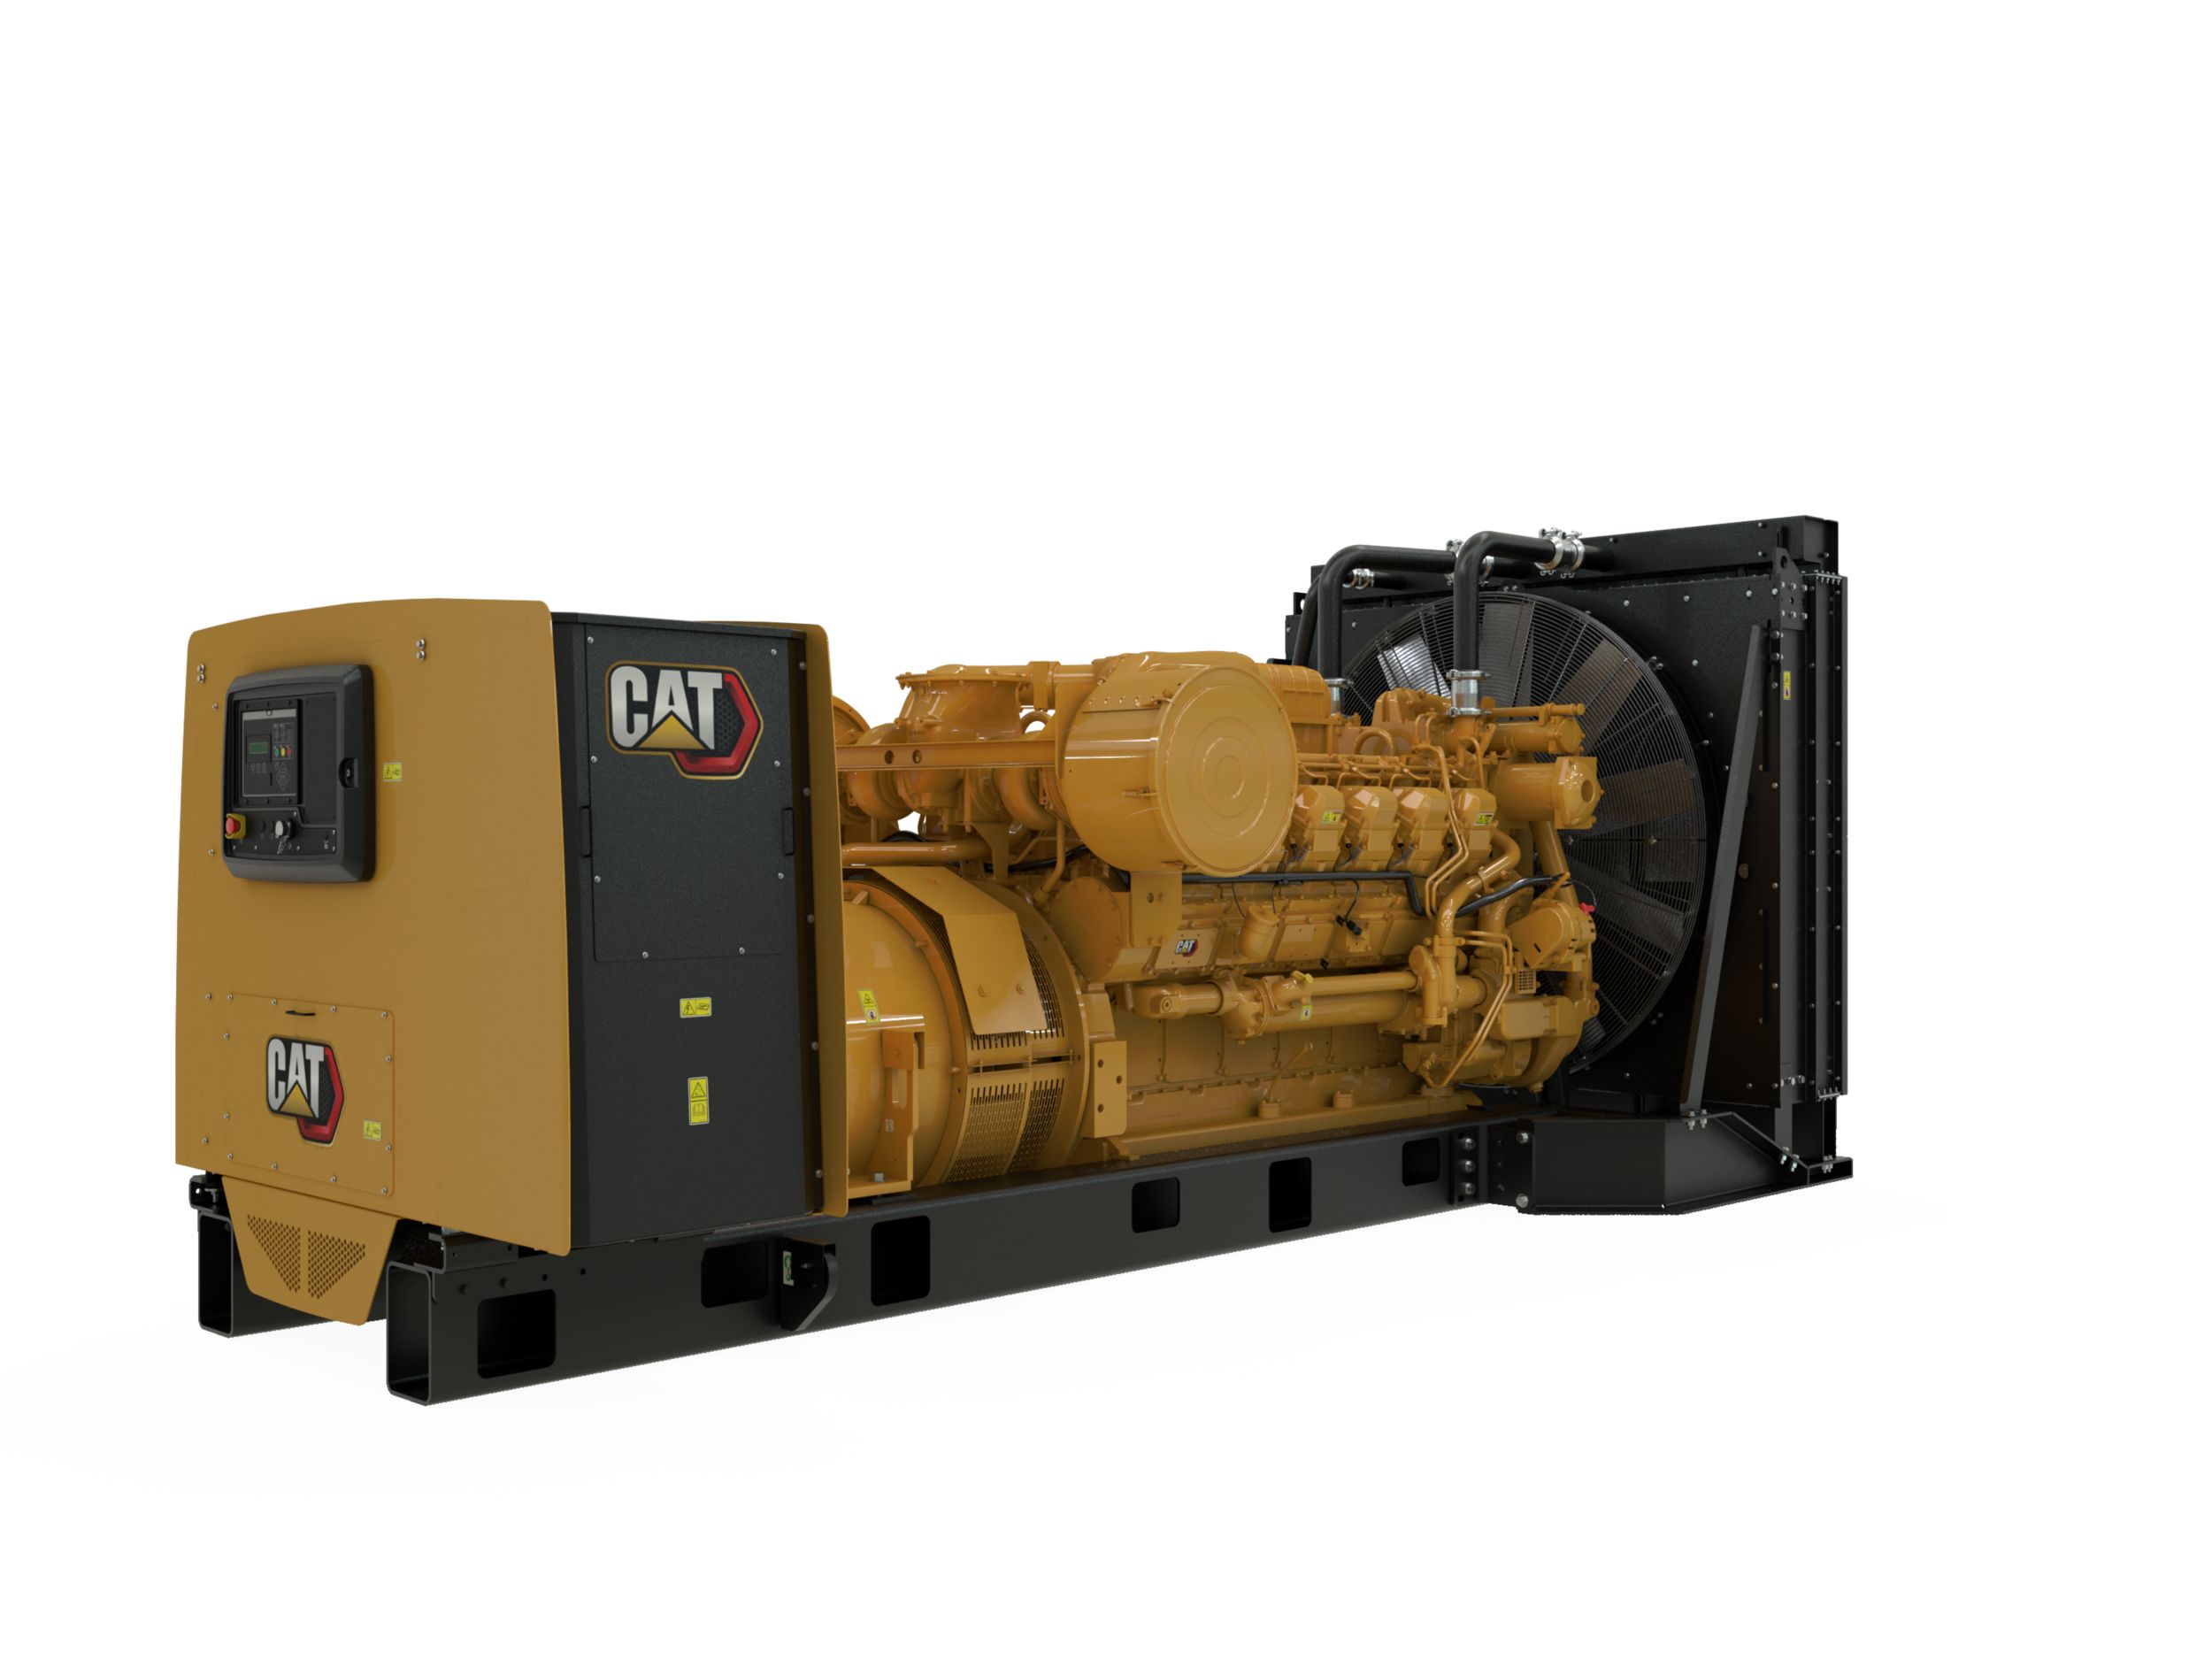 Cat 3512B (50 Hz) with Upgradeable Package 1360 - 1600 kVA